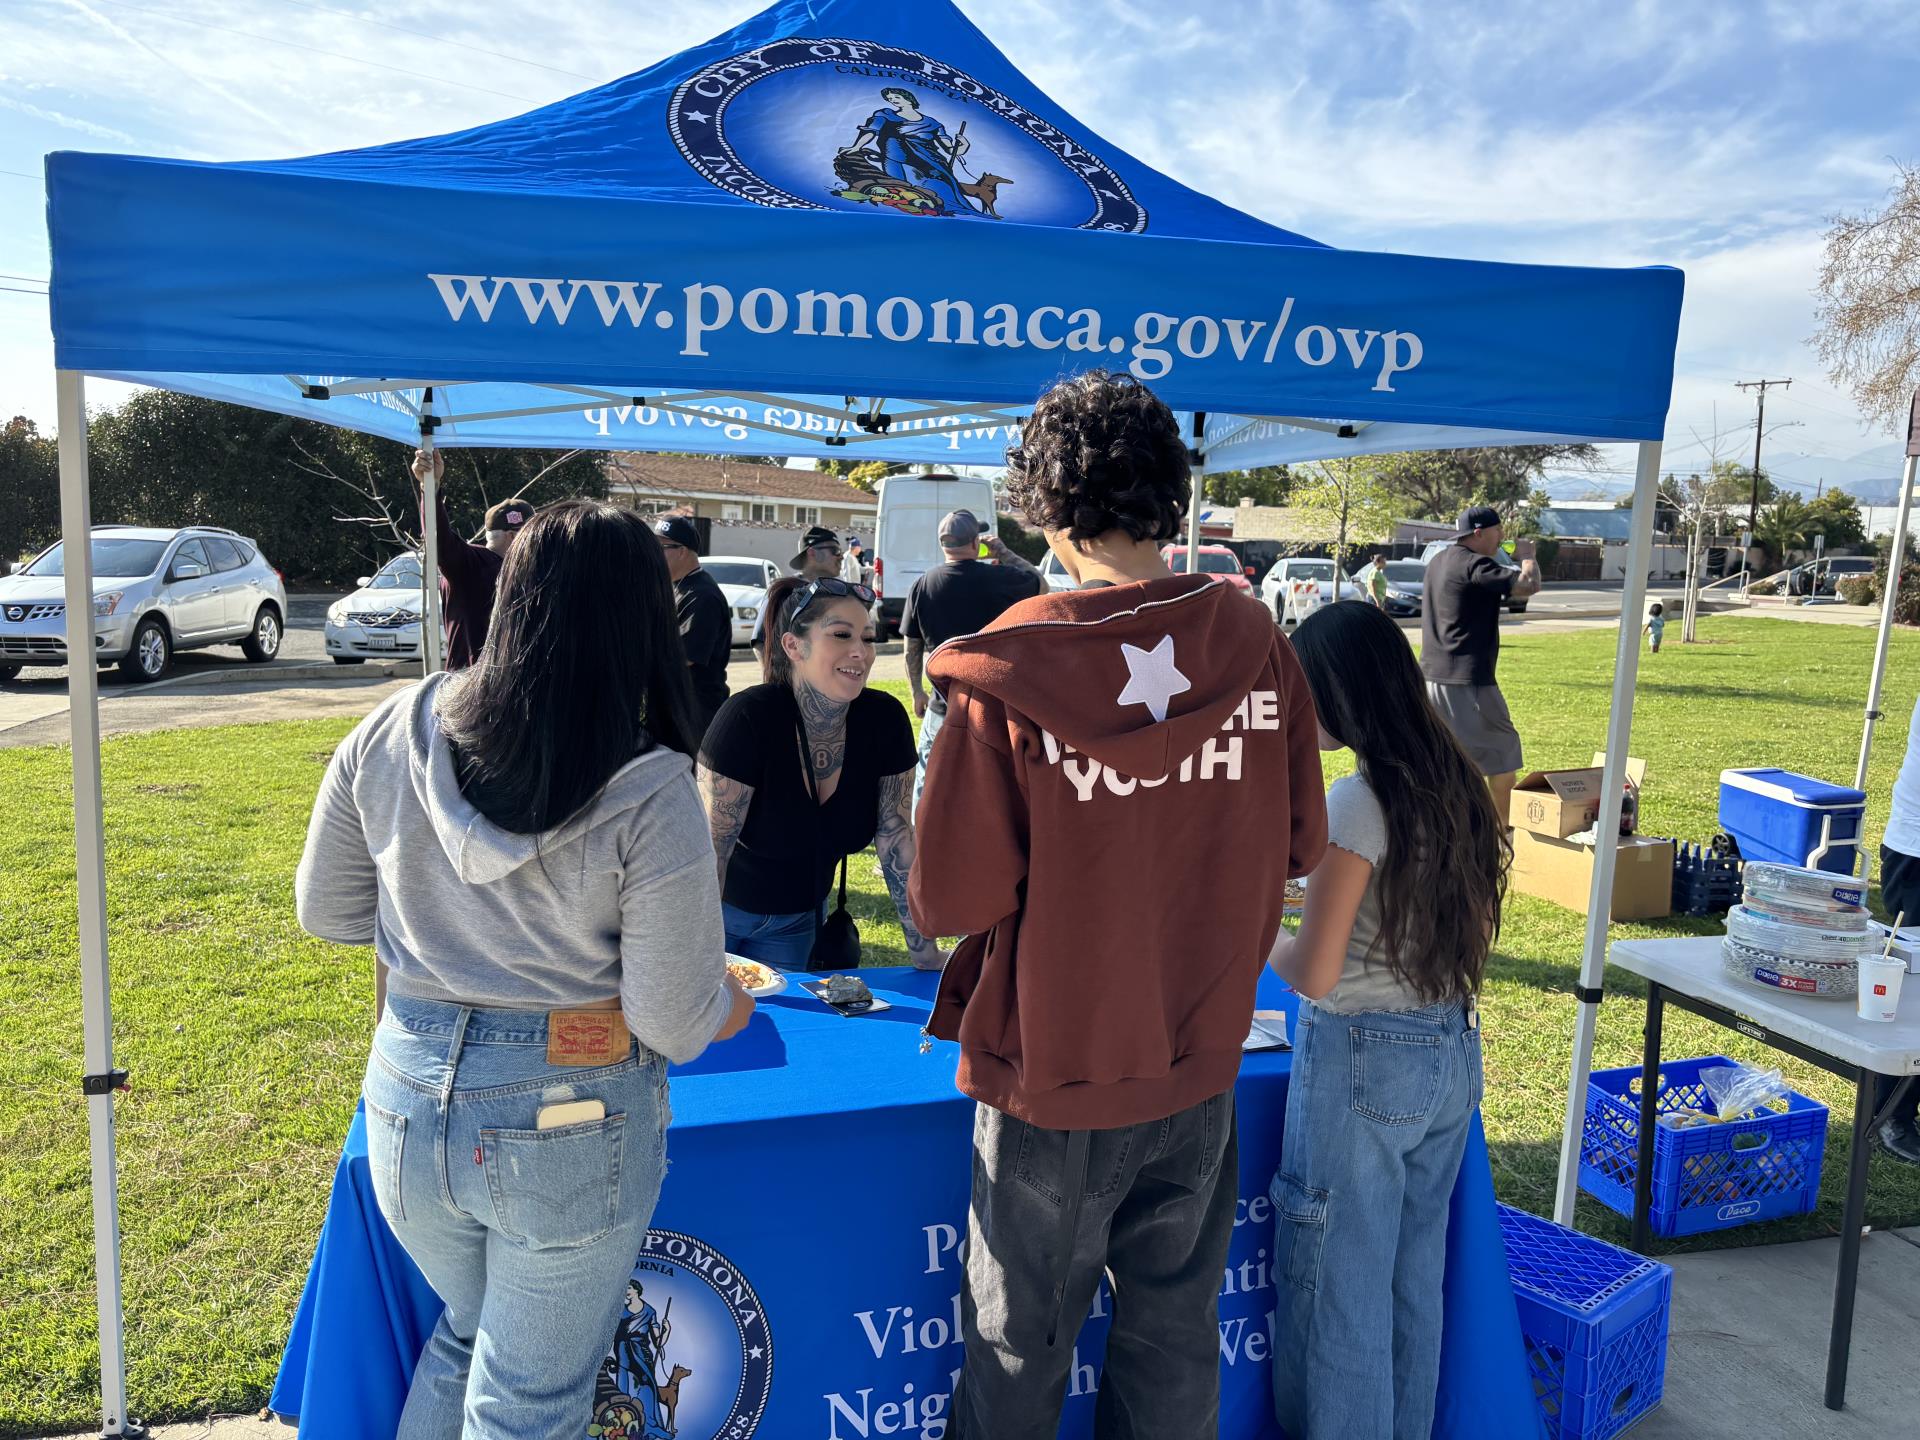 office of violence prevention staff spreading awareness, people standing around the pop up tent looking to gain more information, grassy field behind the tent